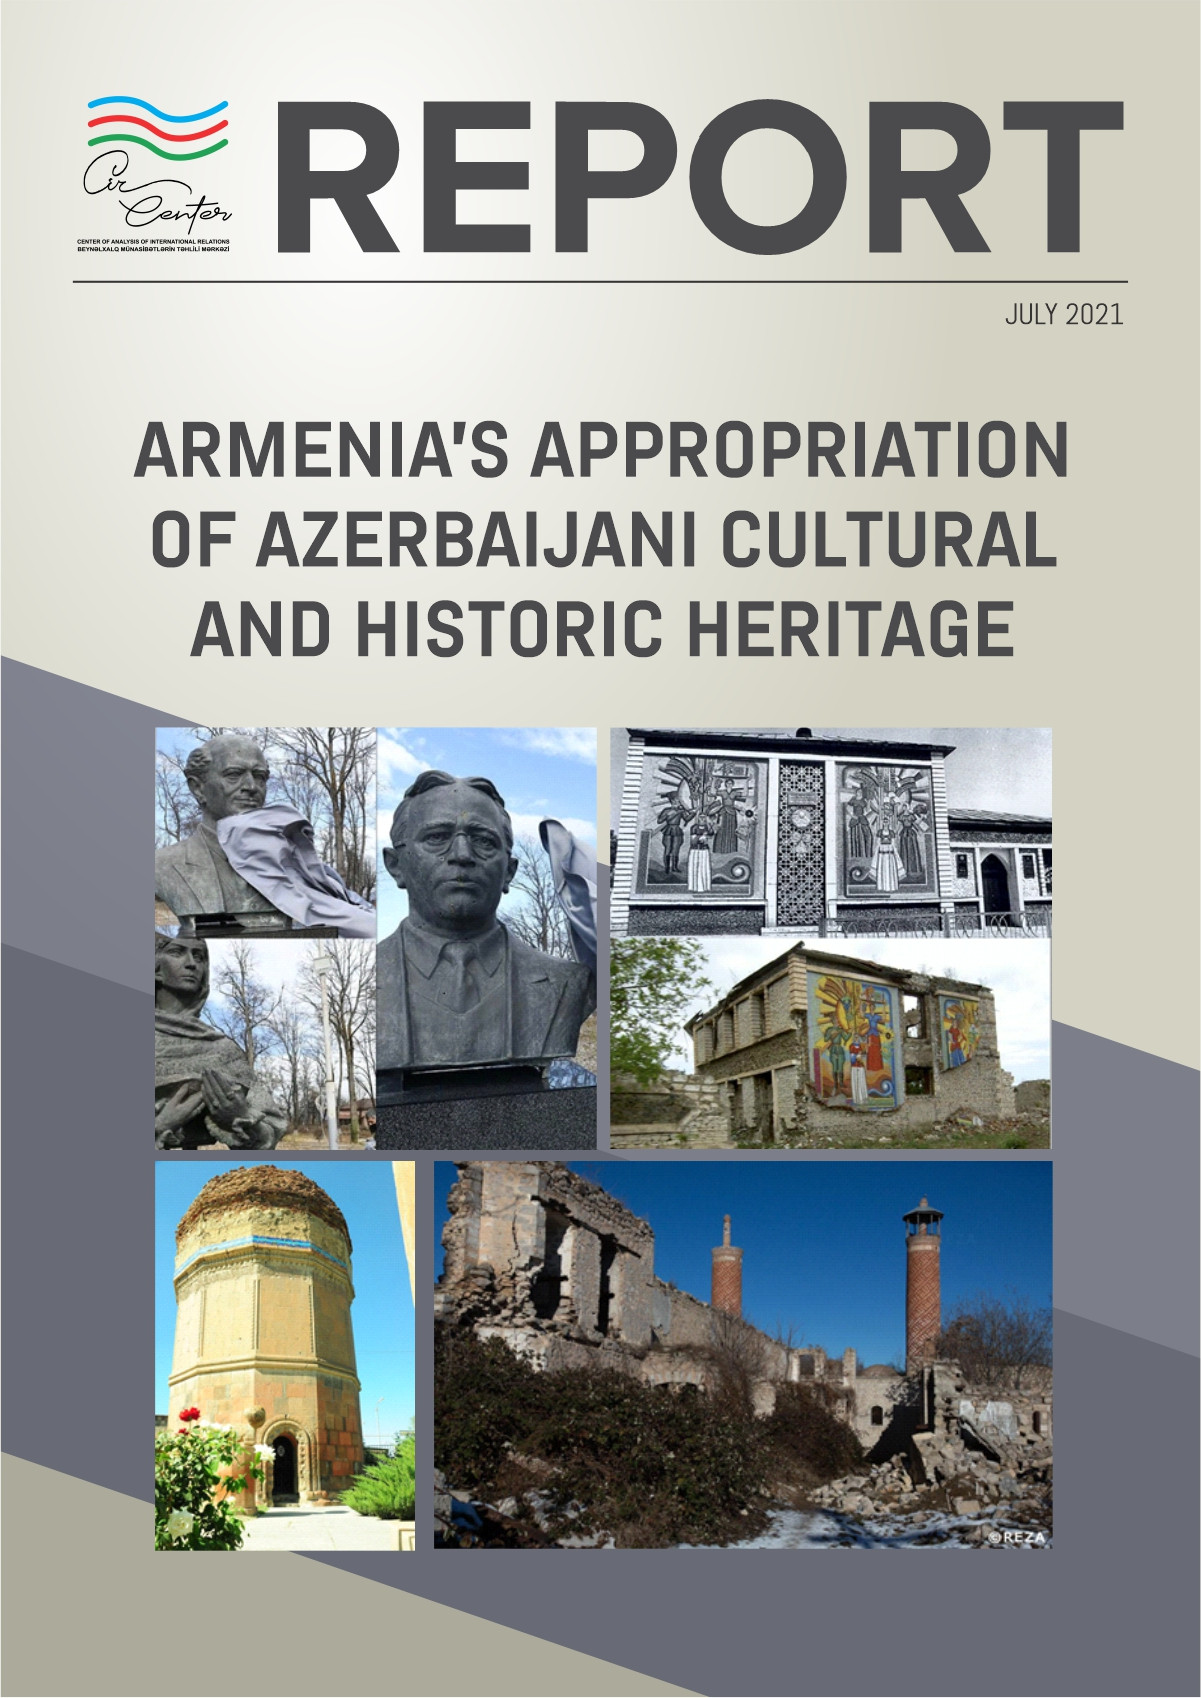 A report on the appropriation of the Azerbaijani cultural and historic heritage by Armenia was prepared by the AIR Center